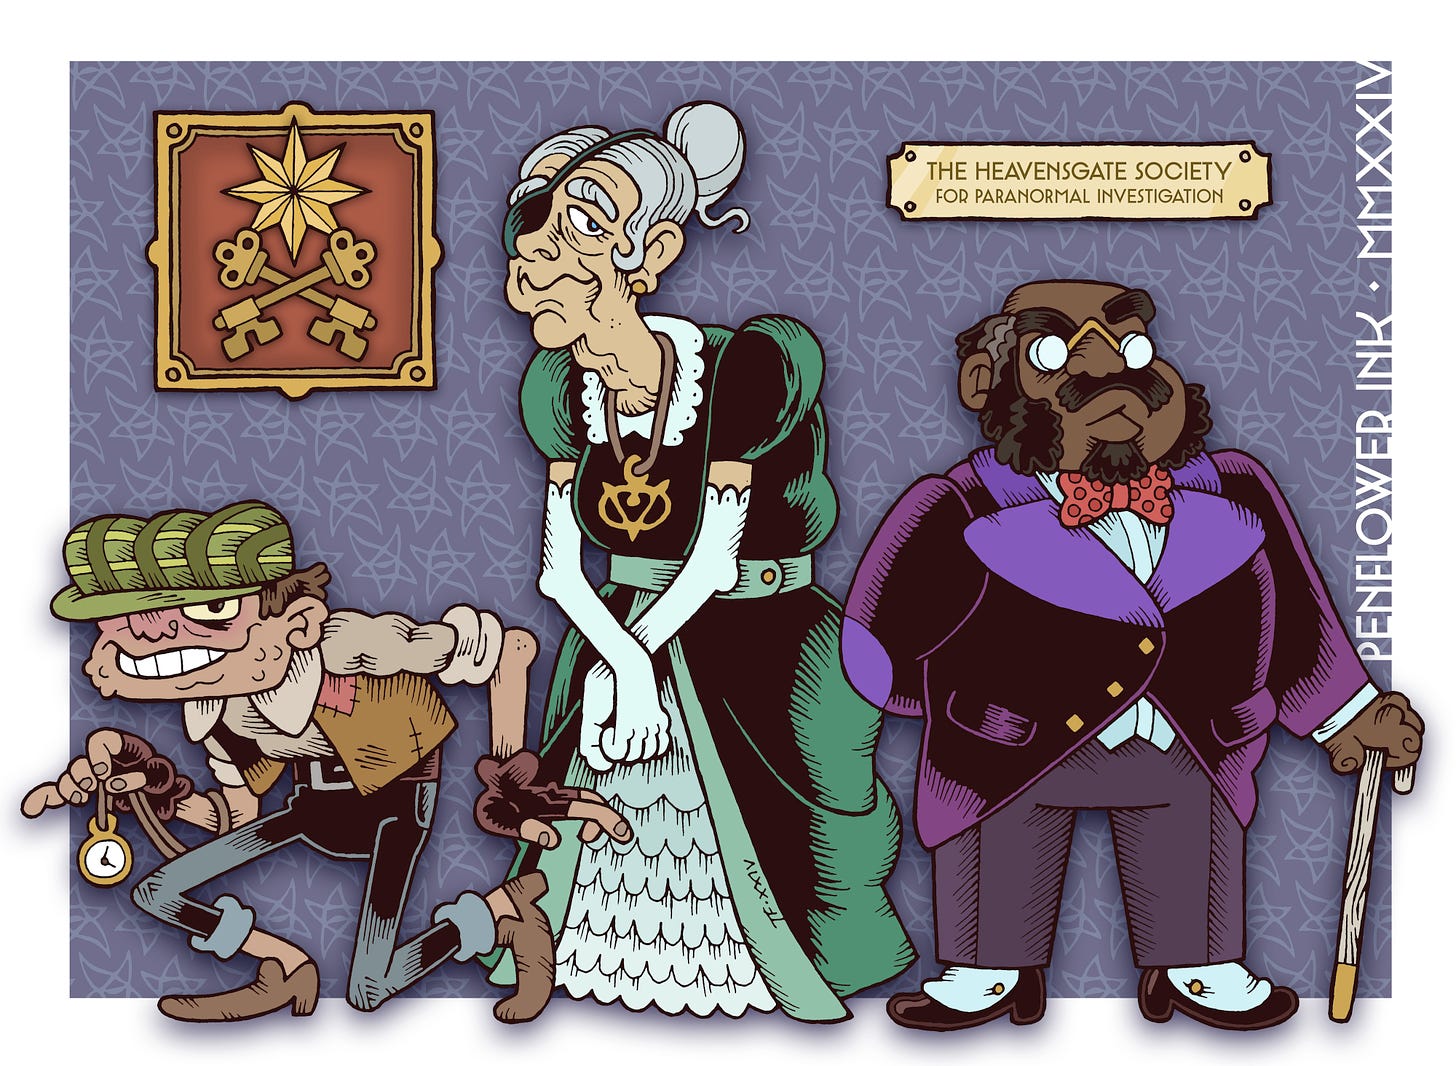 Composite image of three traditionally hand-drawn and digitally coloured Call of Cthulhu investigator characters. From left to right: a tanned, spotty and gangly young man wearing tattered urchin clothes, flat cap and fingerless gloves, holding up a stolen pocket watch. A pale elderly woman with silvery hair, wearing a dark green gown, long white gloves, a gold amulet and an eyepatch over her right eye. A middle-aged black man with large sideburns and mustache, wearing spectacles, a spotted red bow-tie, an elegant purple suit and spats. He is leaning on a white wooden cane. Behind the trio is a wall pattered with elder sign symbols. On the wall hangs a framed gold star above two keys, and a plaque that reads: The Heavensgate Society for Paranormal Investigation.